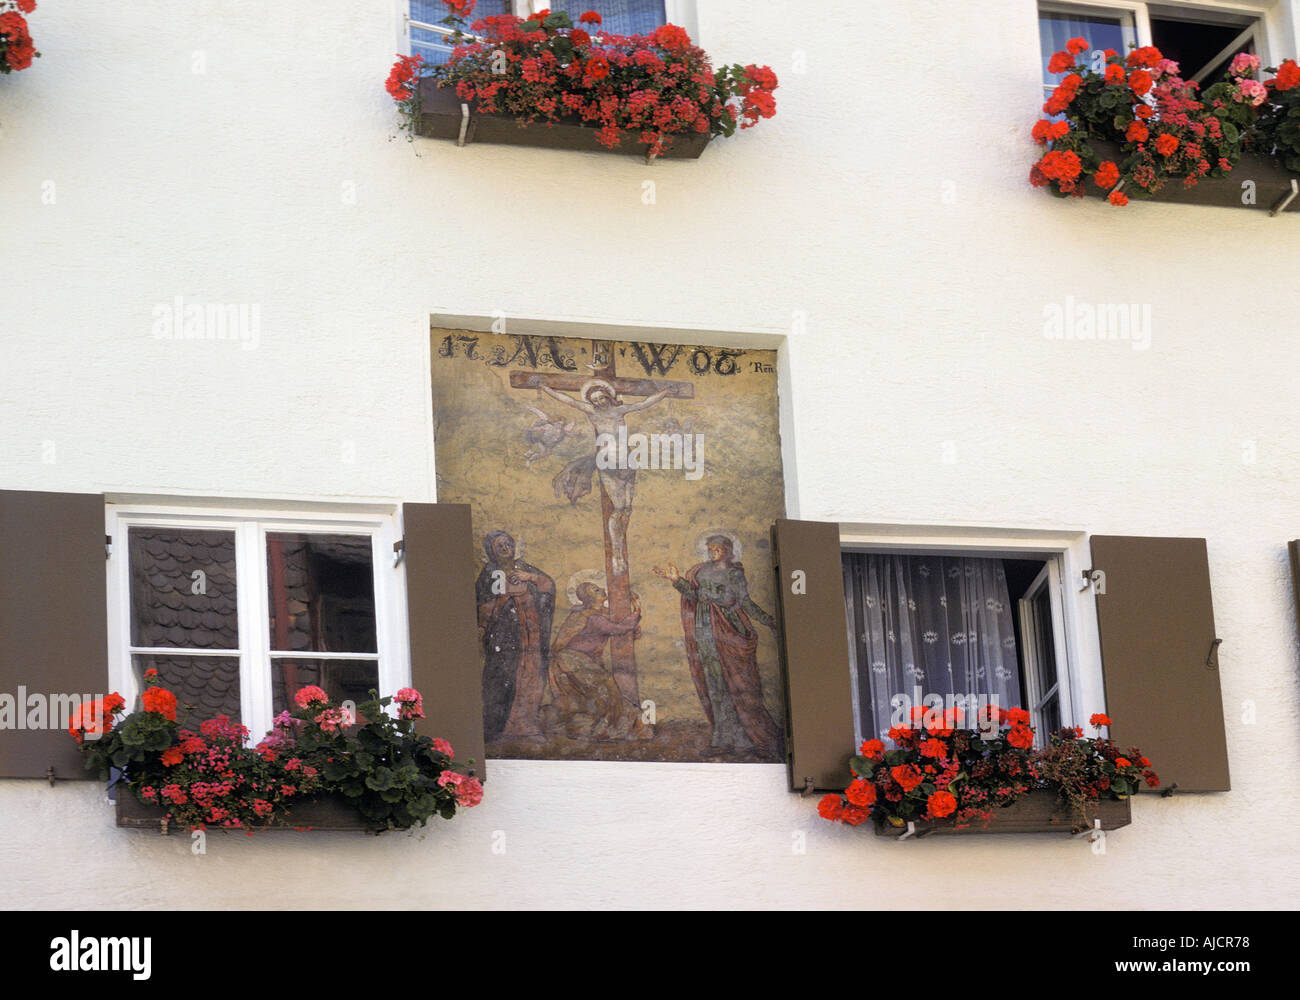 Geranium filled window boxes and a painting of the Crucifixon decorate the facade of a house in Fuessen Bavaria Germany Stock Photo